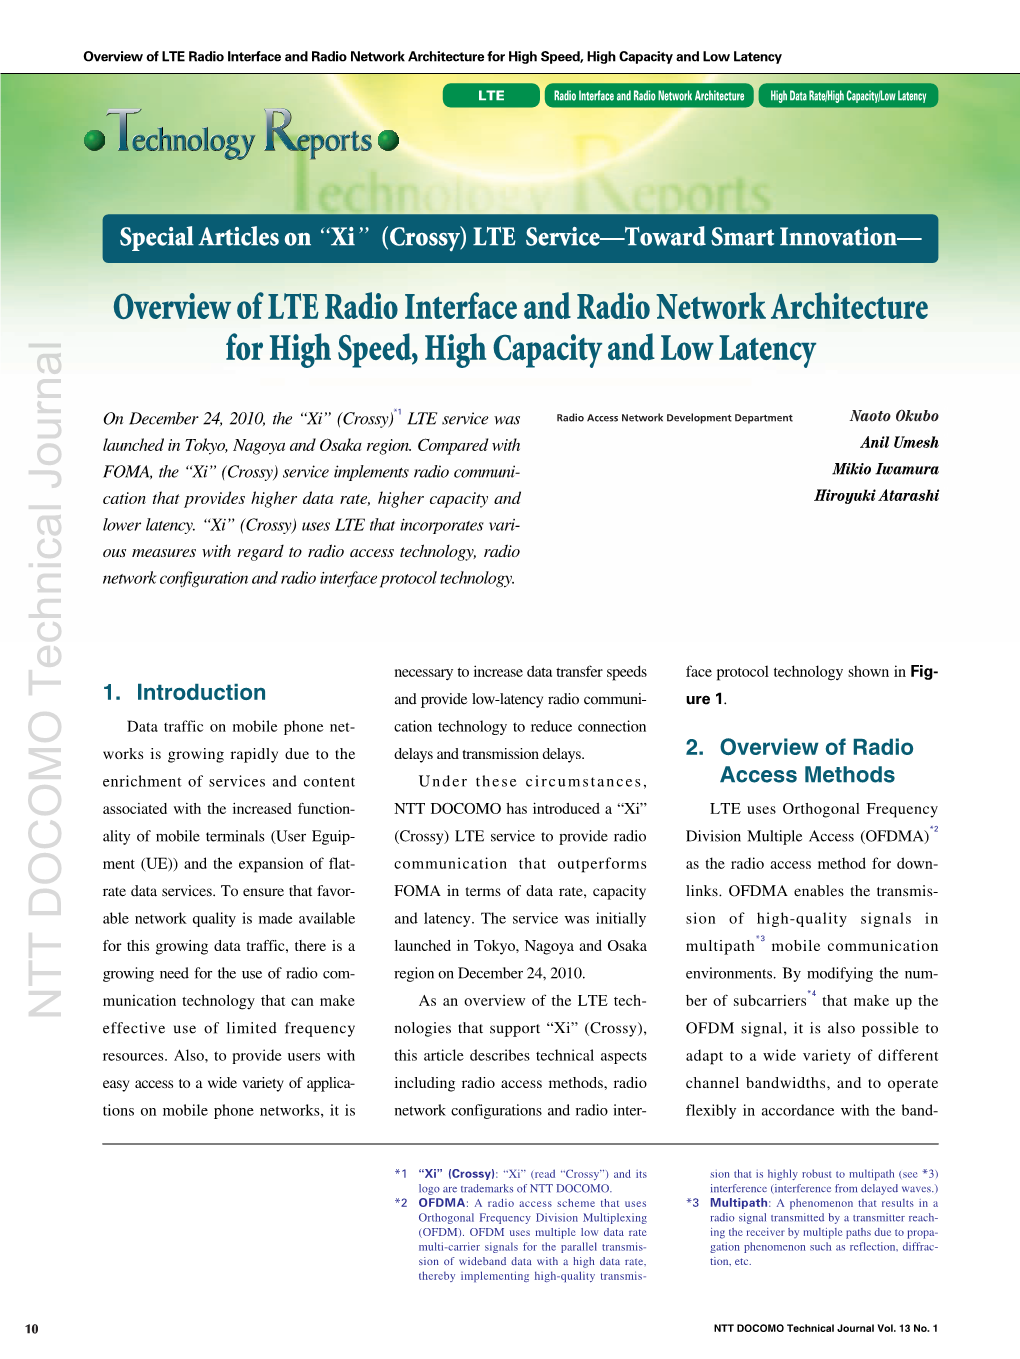 Overview of LTE Radio Interface and Radio Network Architecture for High Speed, High Capacity and Low Latency